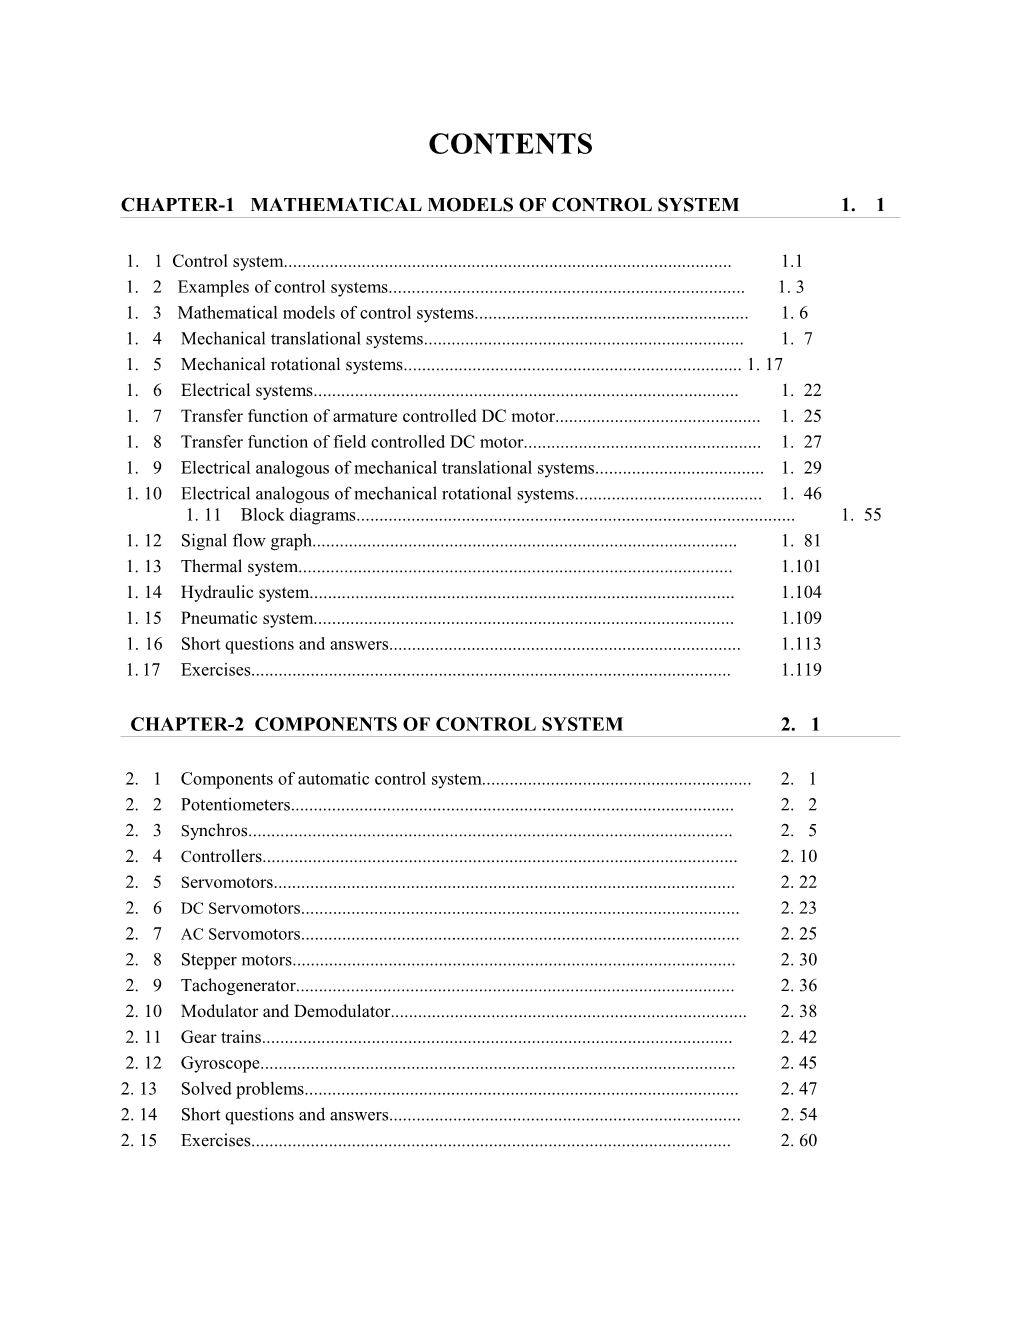 Chapter-1 Mathematical Models of Control System 1. 1